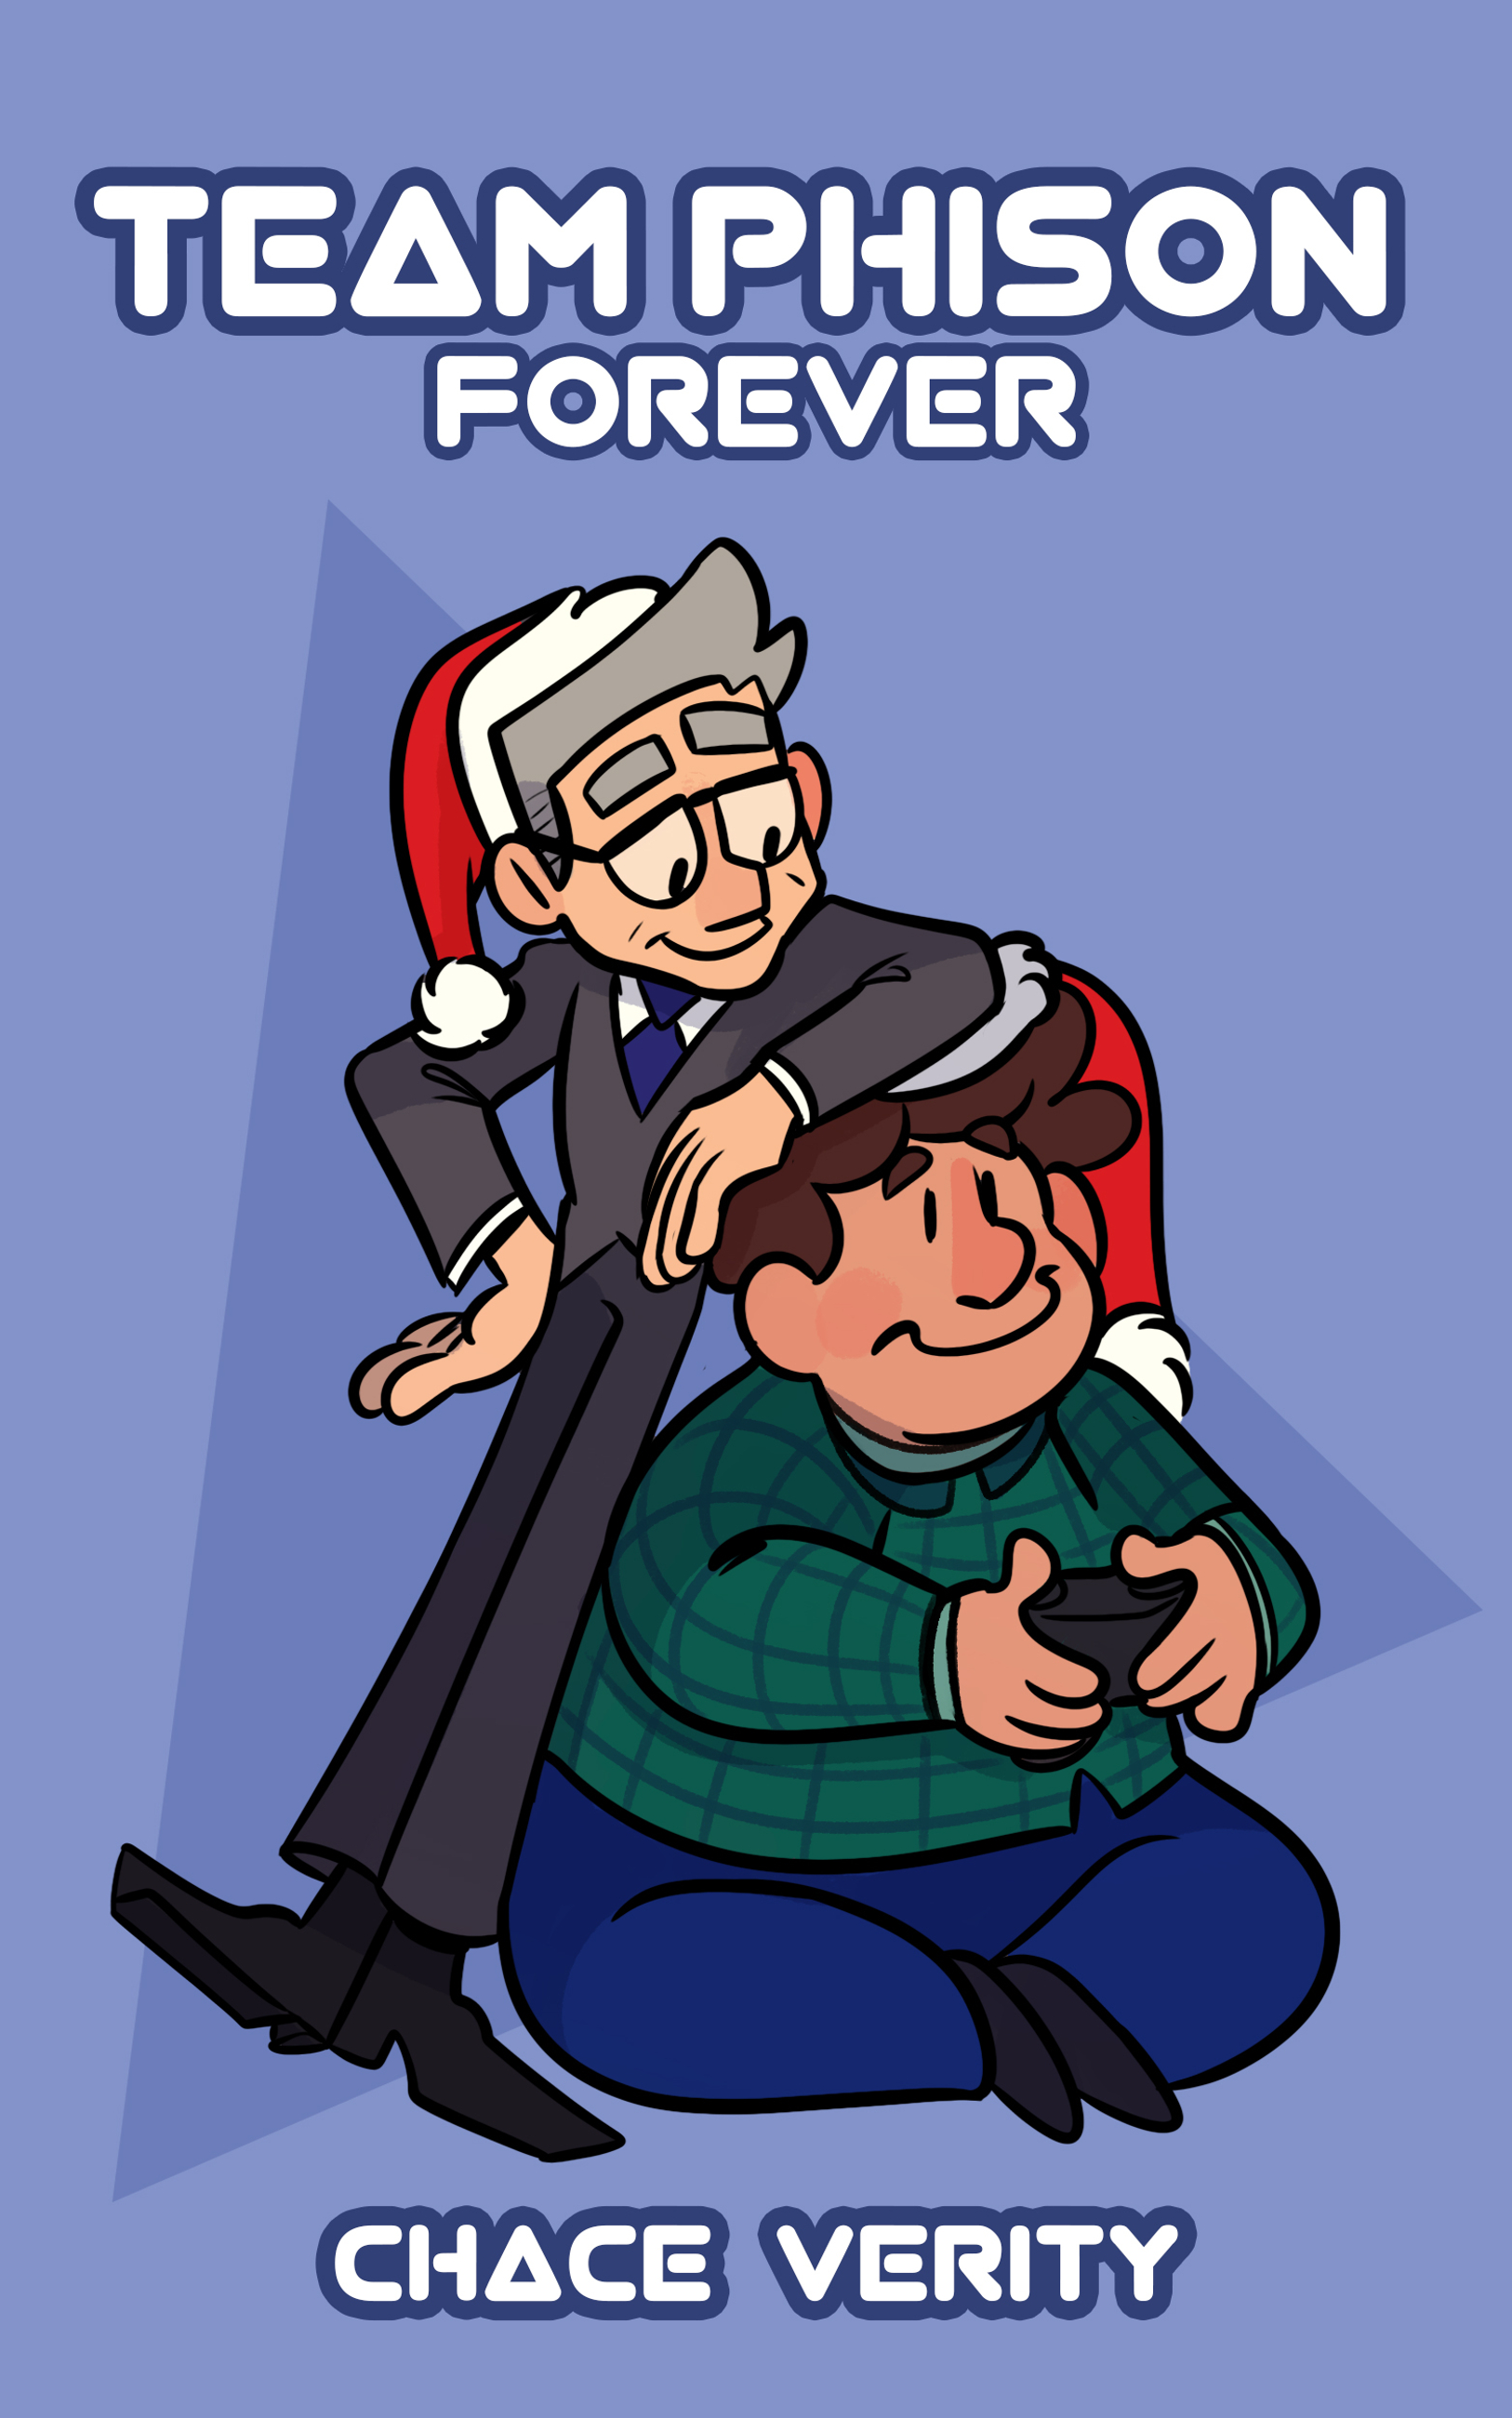 Cover for Team Phison by Chace Verity featuring a drawing of an older man and a younger man playing video games while wearing Santa Claus hats